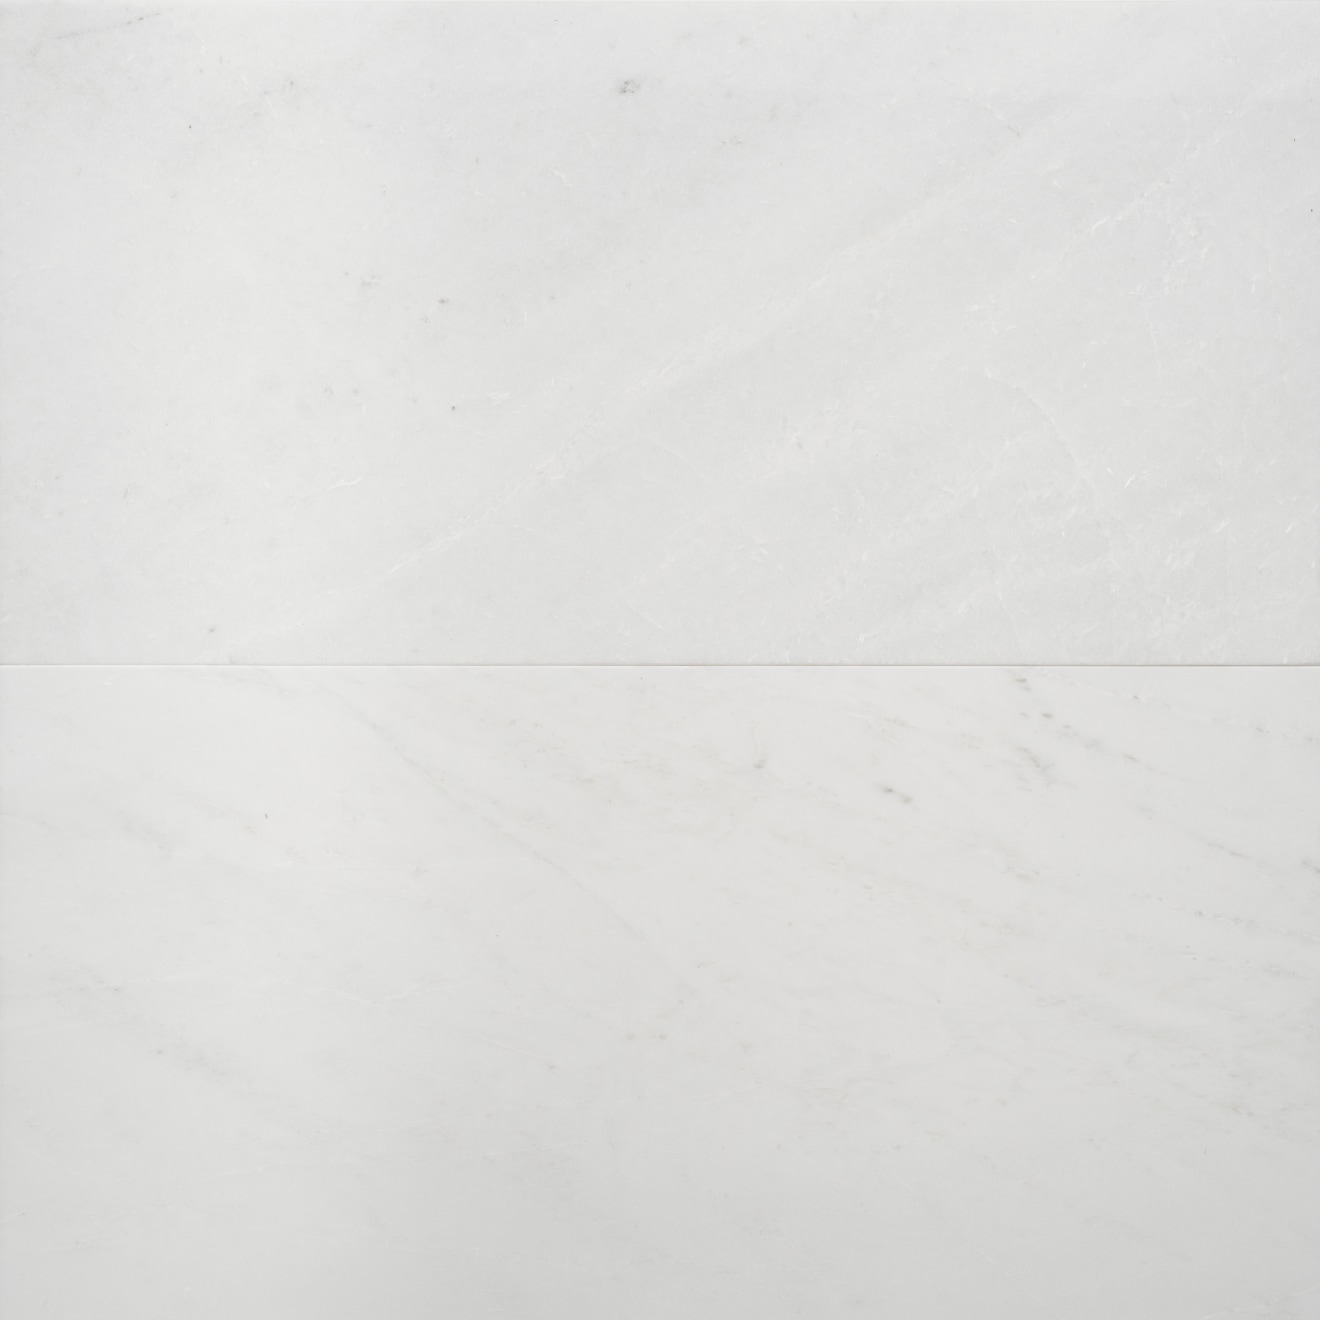 Contemporary Luxe Seamless Black And White Marble Texture Design